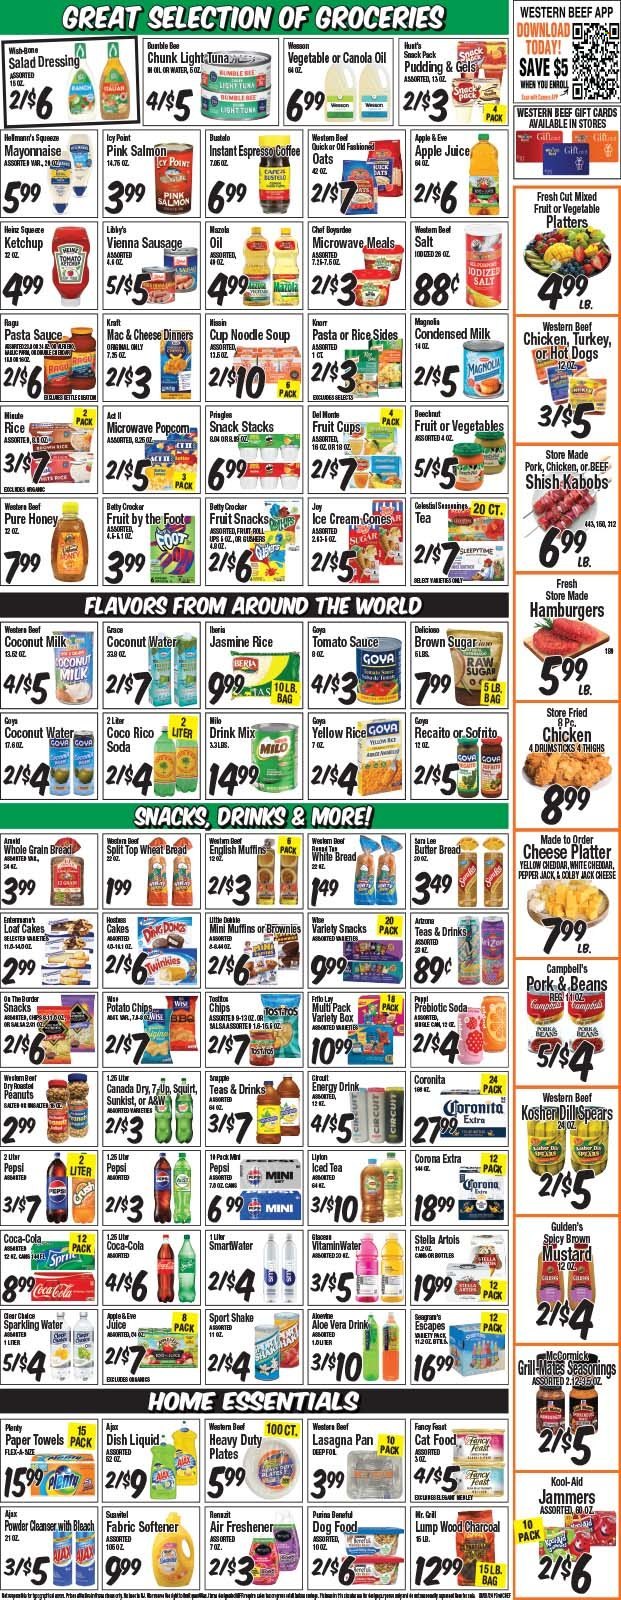 thumbnail - Western Beef Flyer - 08/01/2024 - 08/07/2024 - Sales products - bread, english muffins, wheat bread, white bread, Sara Lee, loaf cake, fruit cup, chicken drumsticks, kabobs, hamburger, Campbell's, mac and cheese, hot dog, pasta sauce, soup, Bumble Bee, noodles cup, noodles, lasagna meal, pasta sides, Kraft®, spaghetti sauce, ready meal, rice sides, vienna sausage, Colby cheese, Pepper Jack cheese, cheese, pudding, condensed milk, Milo, mayonnaise, ice cream, ice cones, fruit snack, potato chips, Pringles, chips, Frito-Lay, Tostitos, salty snack, cane sugar, canned tuna, coconut milk, tomato sauce, light tuna, Goya, Chef Boyardee, Del Monte, canned fish, jasmine rice, spice, mustard, salad dressing, ketchup, salsa, sauce, canola oil, vegetable oil, oil, roasted peanuts, peanuts, apple juice, Canada Dry, Coca-Cola, ginger ale, Pepsi, juice, energy drink, Lipton, fruit drink, ice tea, coconut water, soft drink, 7UP, Snapple, A&W, electrolyte drink, soda, sparkling water, bottled water, Smartwater, vitamin water, aloe vera, carbonated soft drink, beer, Stella Artois, Corona Extra, Plenty, kitchen towels, paper towels, Ajax, fabric softener, Suavitel, dishwashing liquid, Raw Sugar, cleanser, air freshener. Page 3.